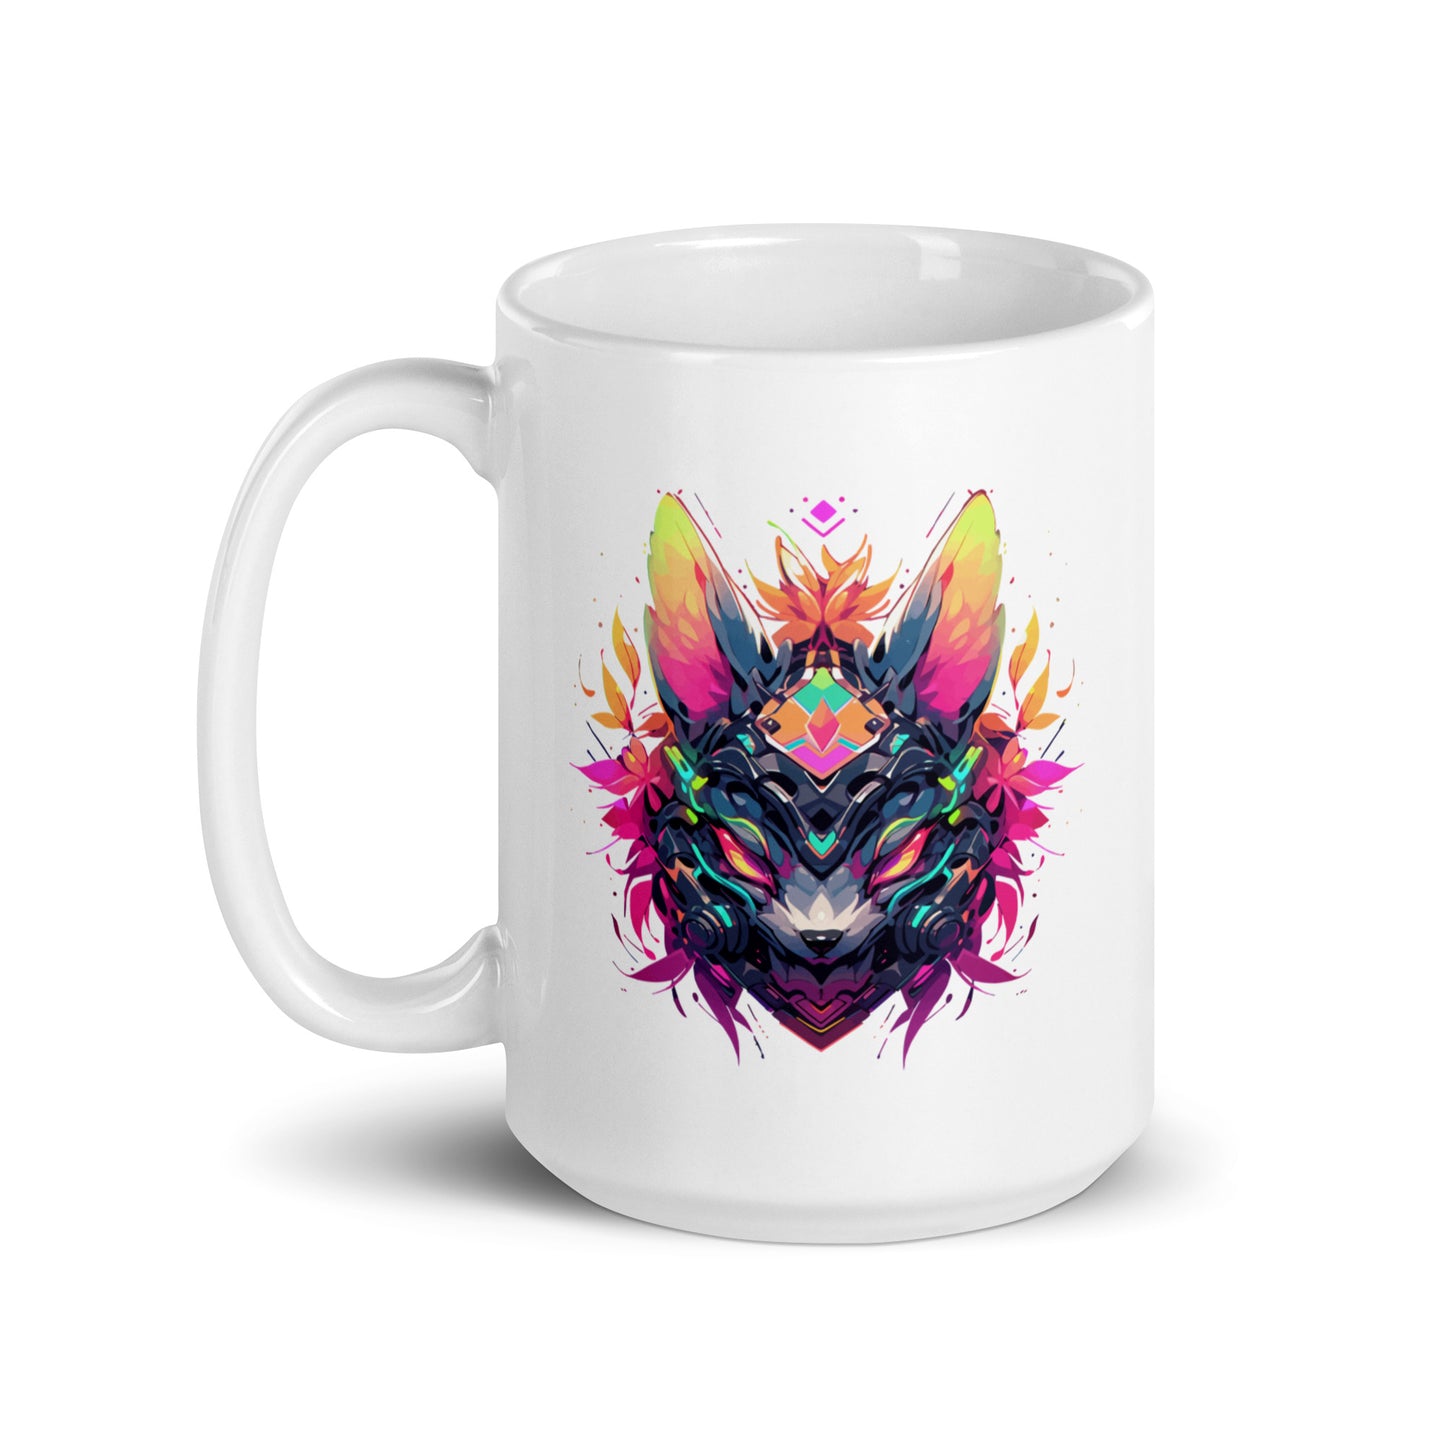 Colorful fox head with bright patterns, Pop Art style illustration with cyber animal face, Red eyes and flowers, Abstract geometric composition - White glossy mug